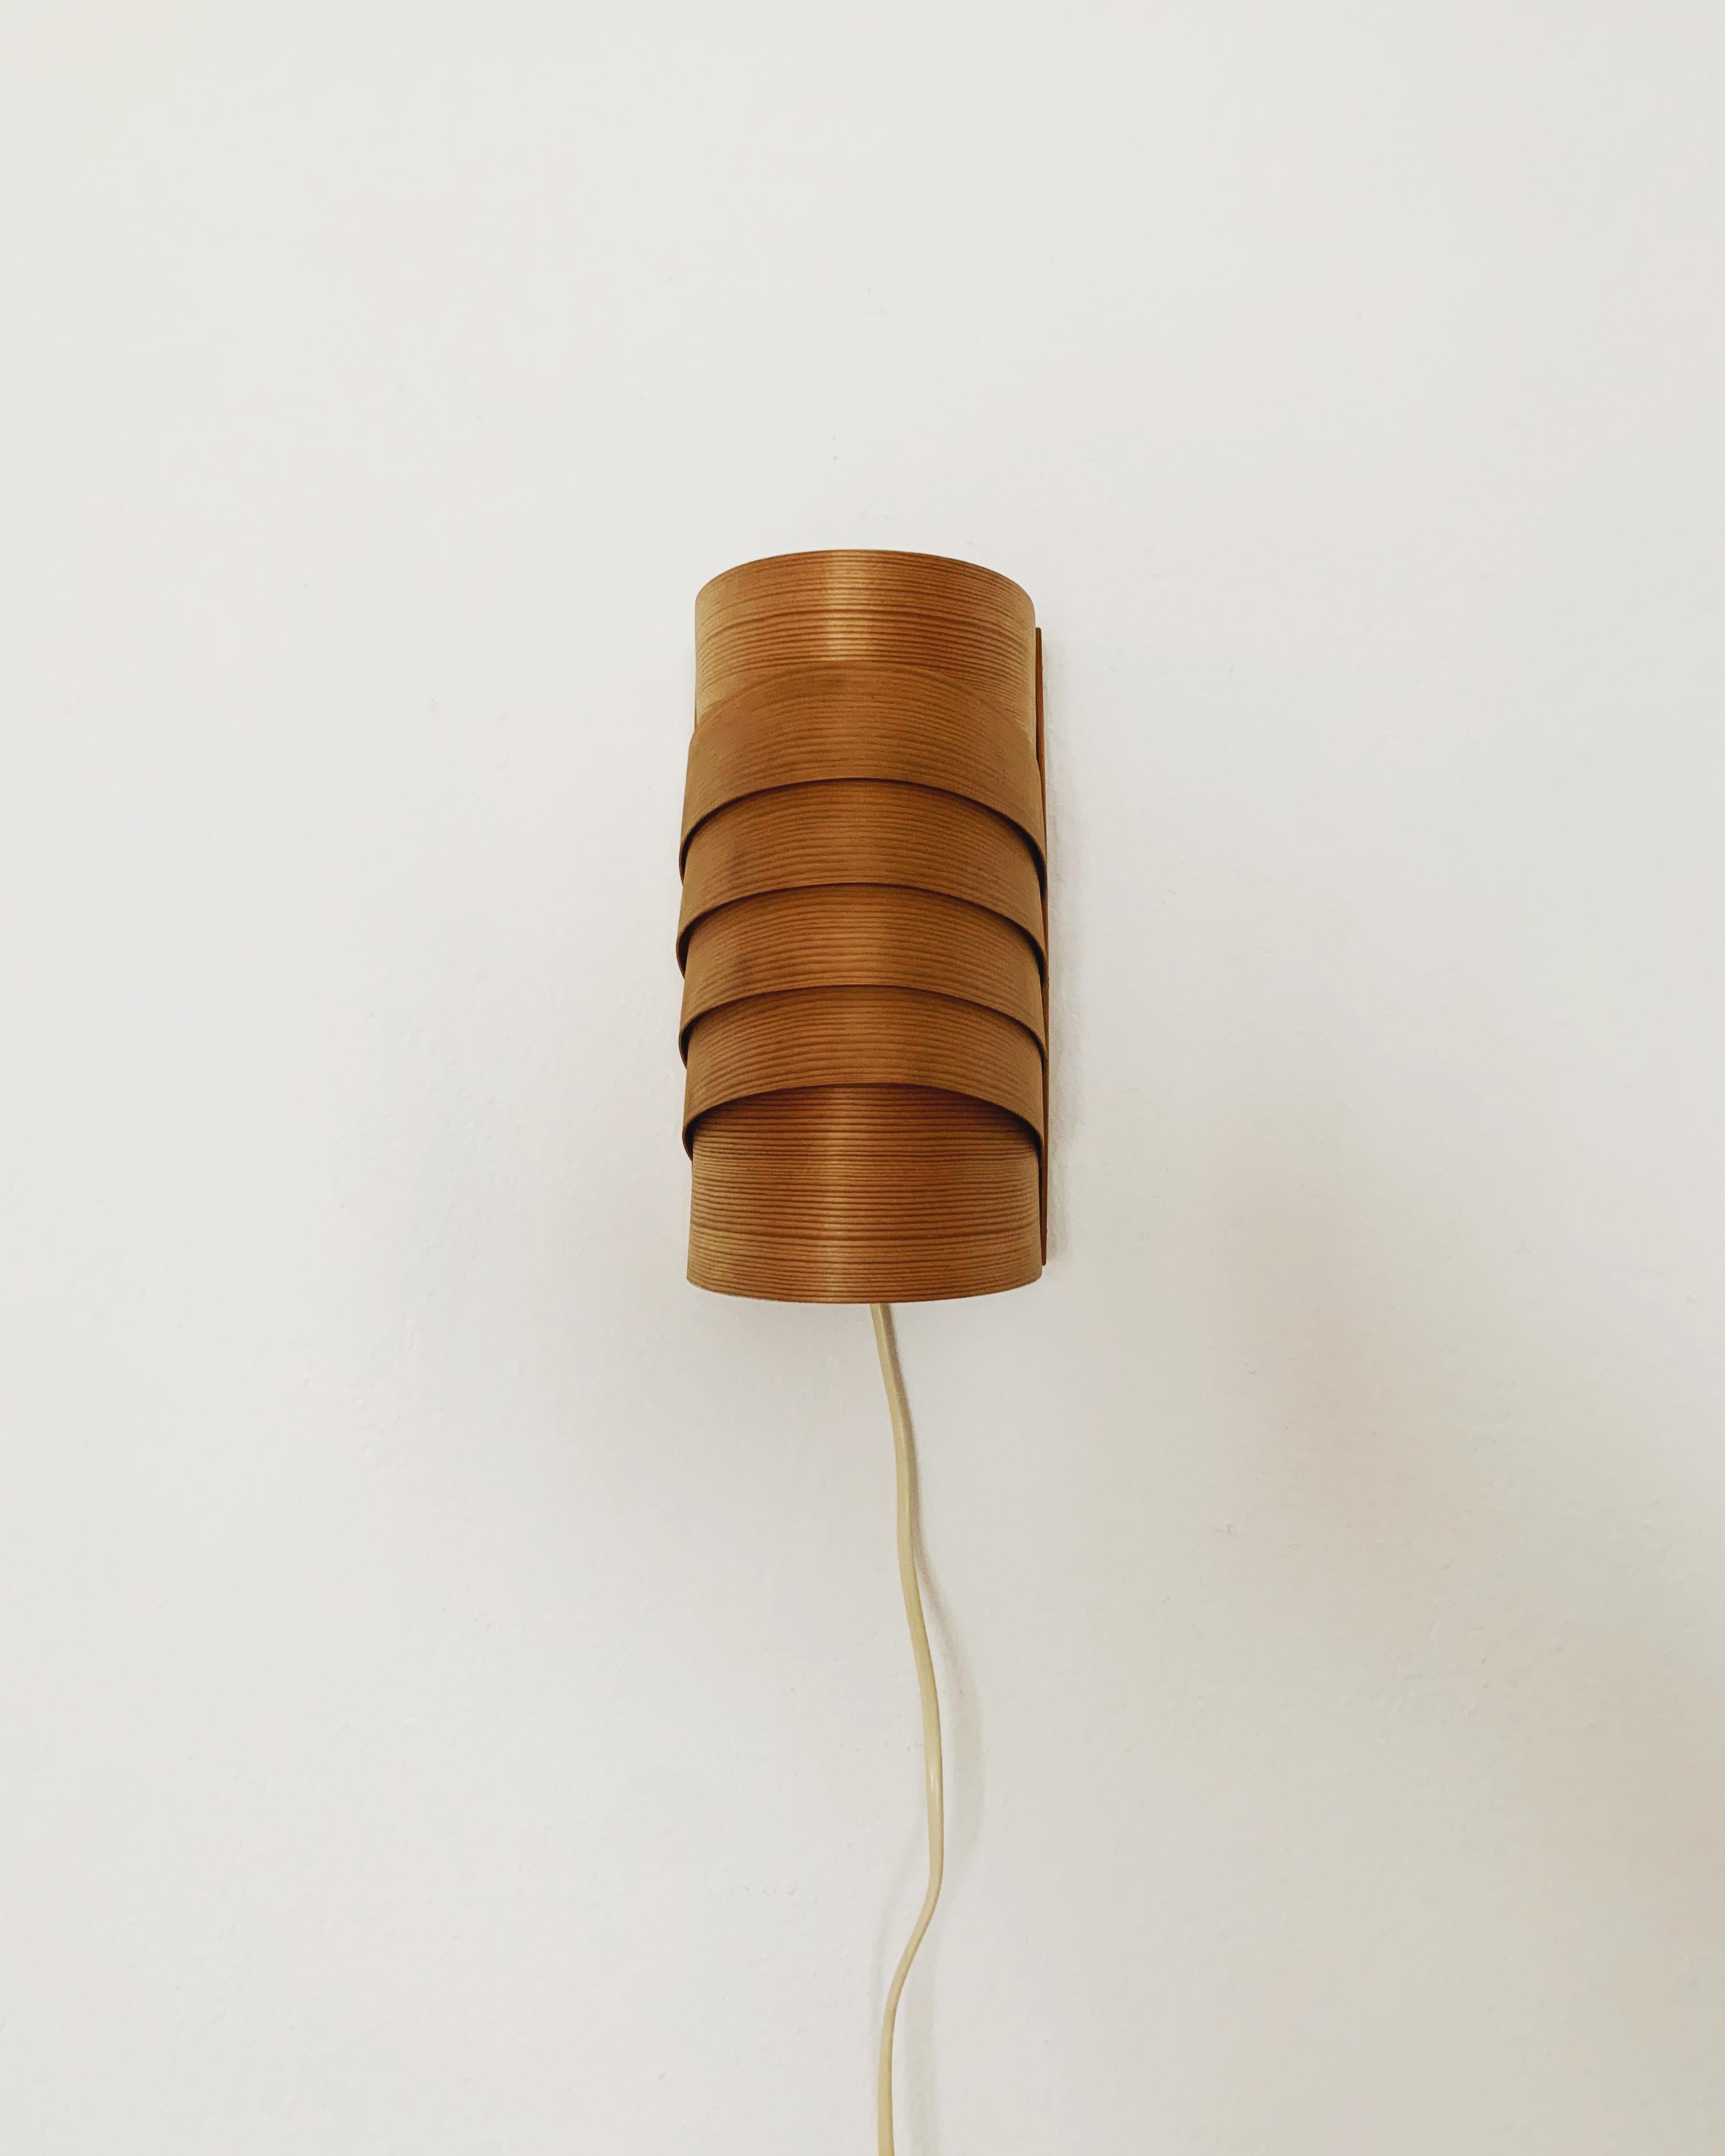 Extraordinarily beautiful wooden wall lamp from the 1960s.
Loving and high-quality processing.
The design and the material create a very warm and pleasant light.
The play of light created by the slats makes the lamp even more